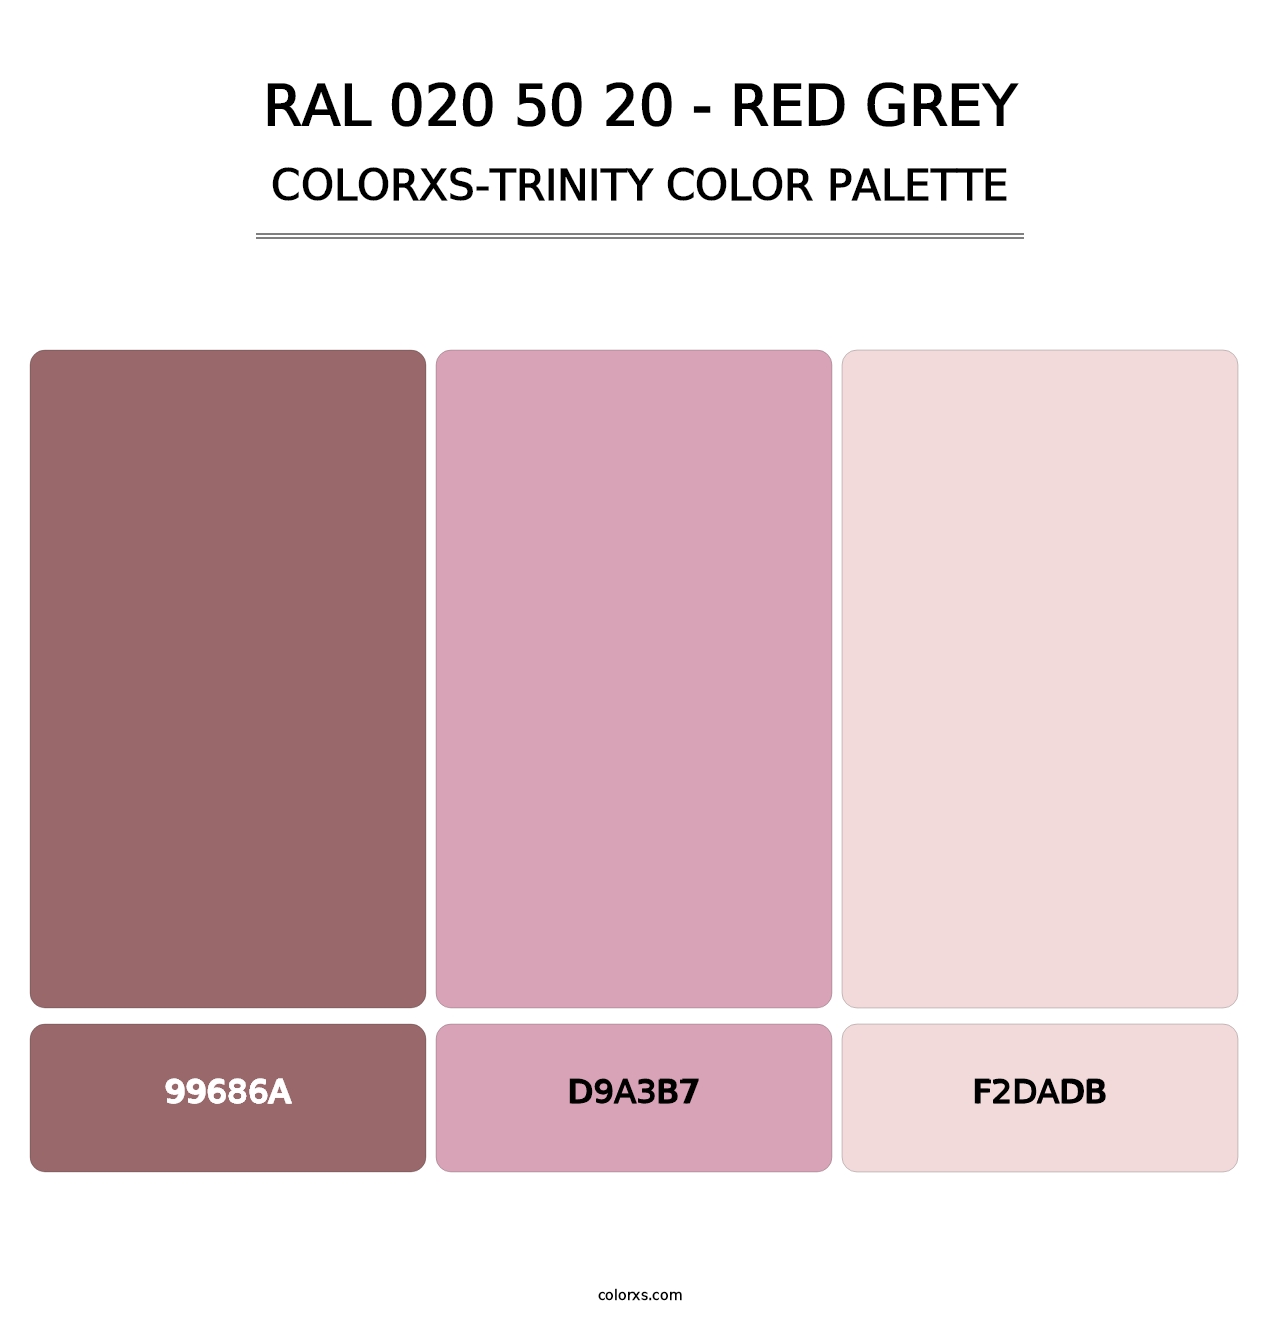 RAL 020 50 20 - Red Grey - Colorxs Trinity Palette